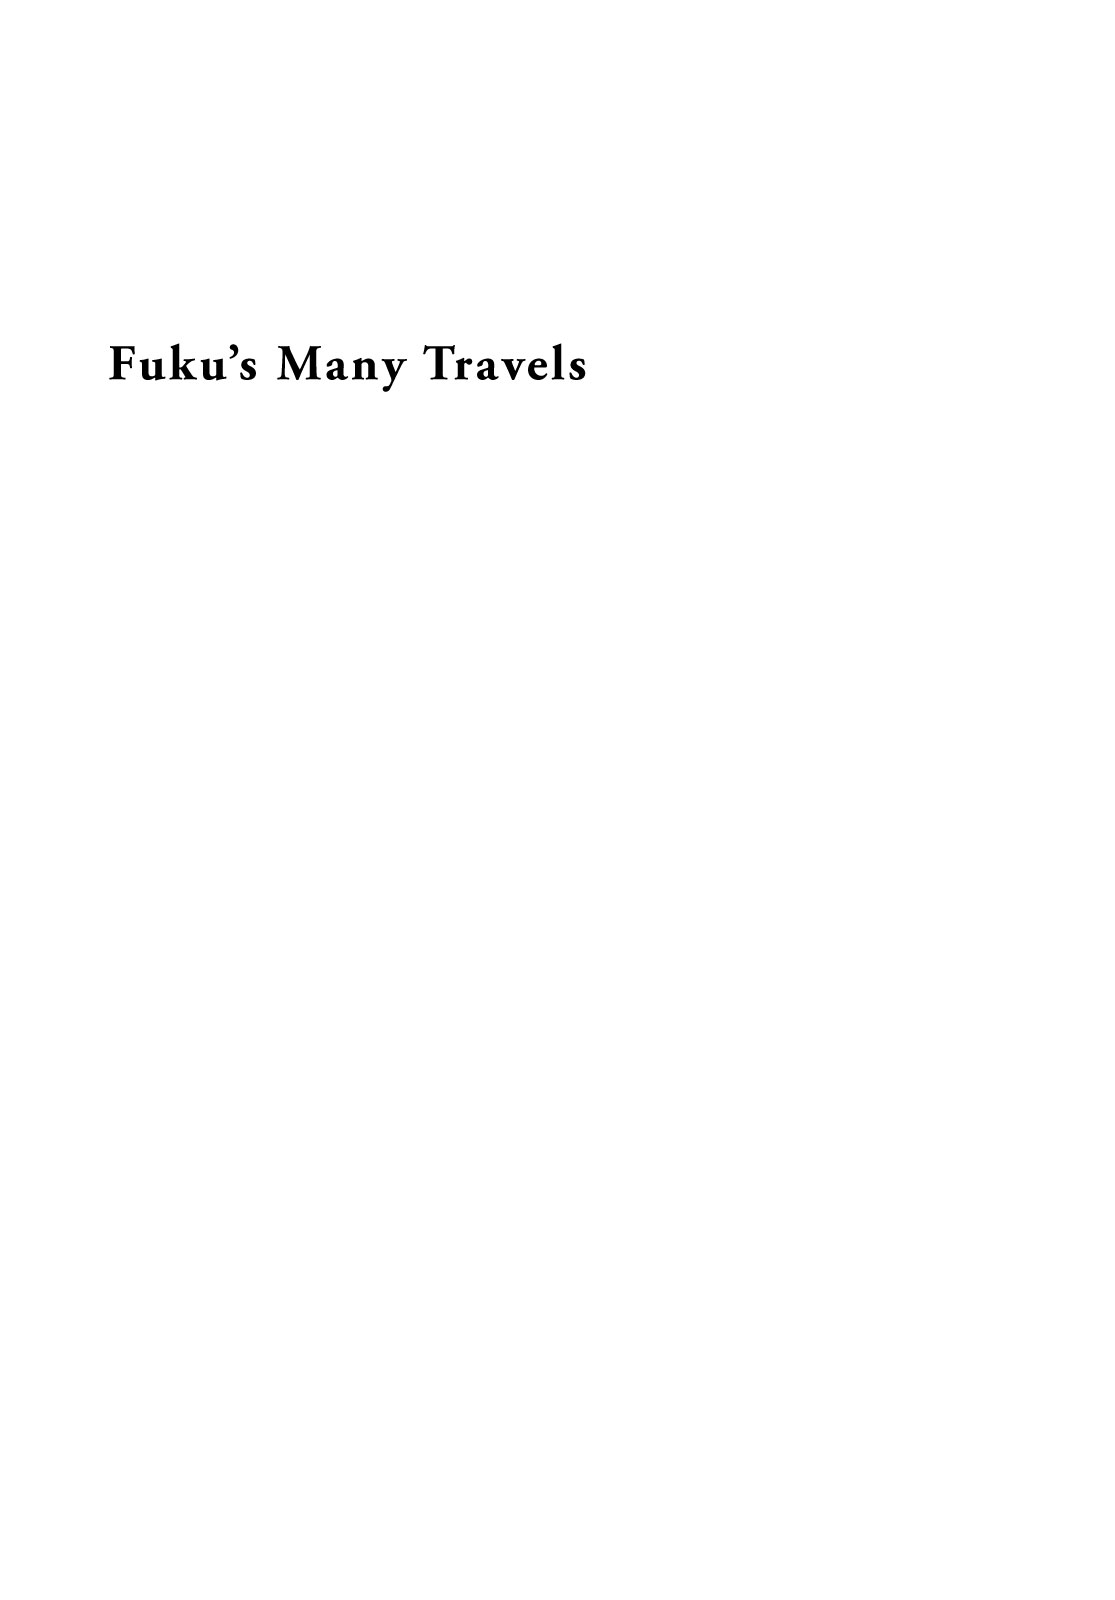 A Tale of Royal Disturbance: Now He's Gone from Echo Valley Vol. 1 Ch. 7 Fuku’s Many Travels